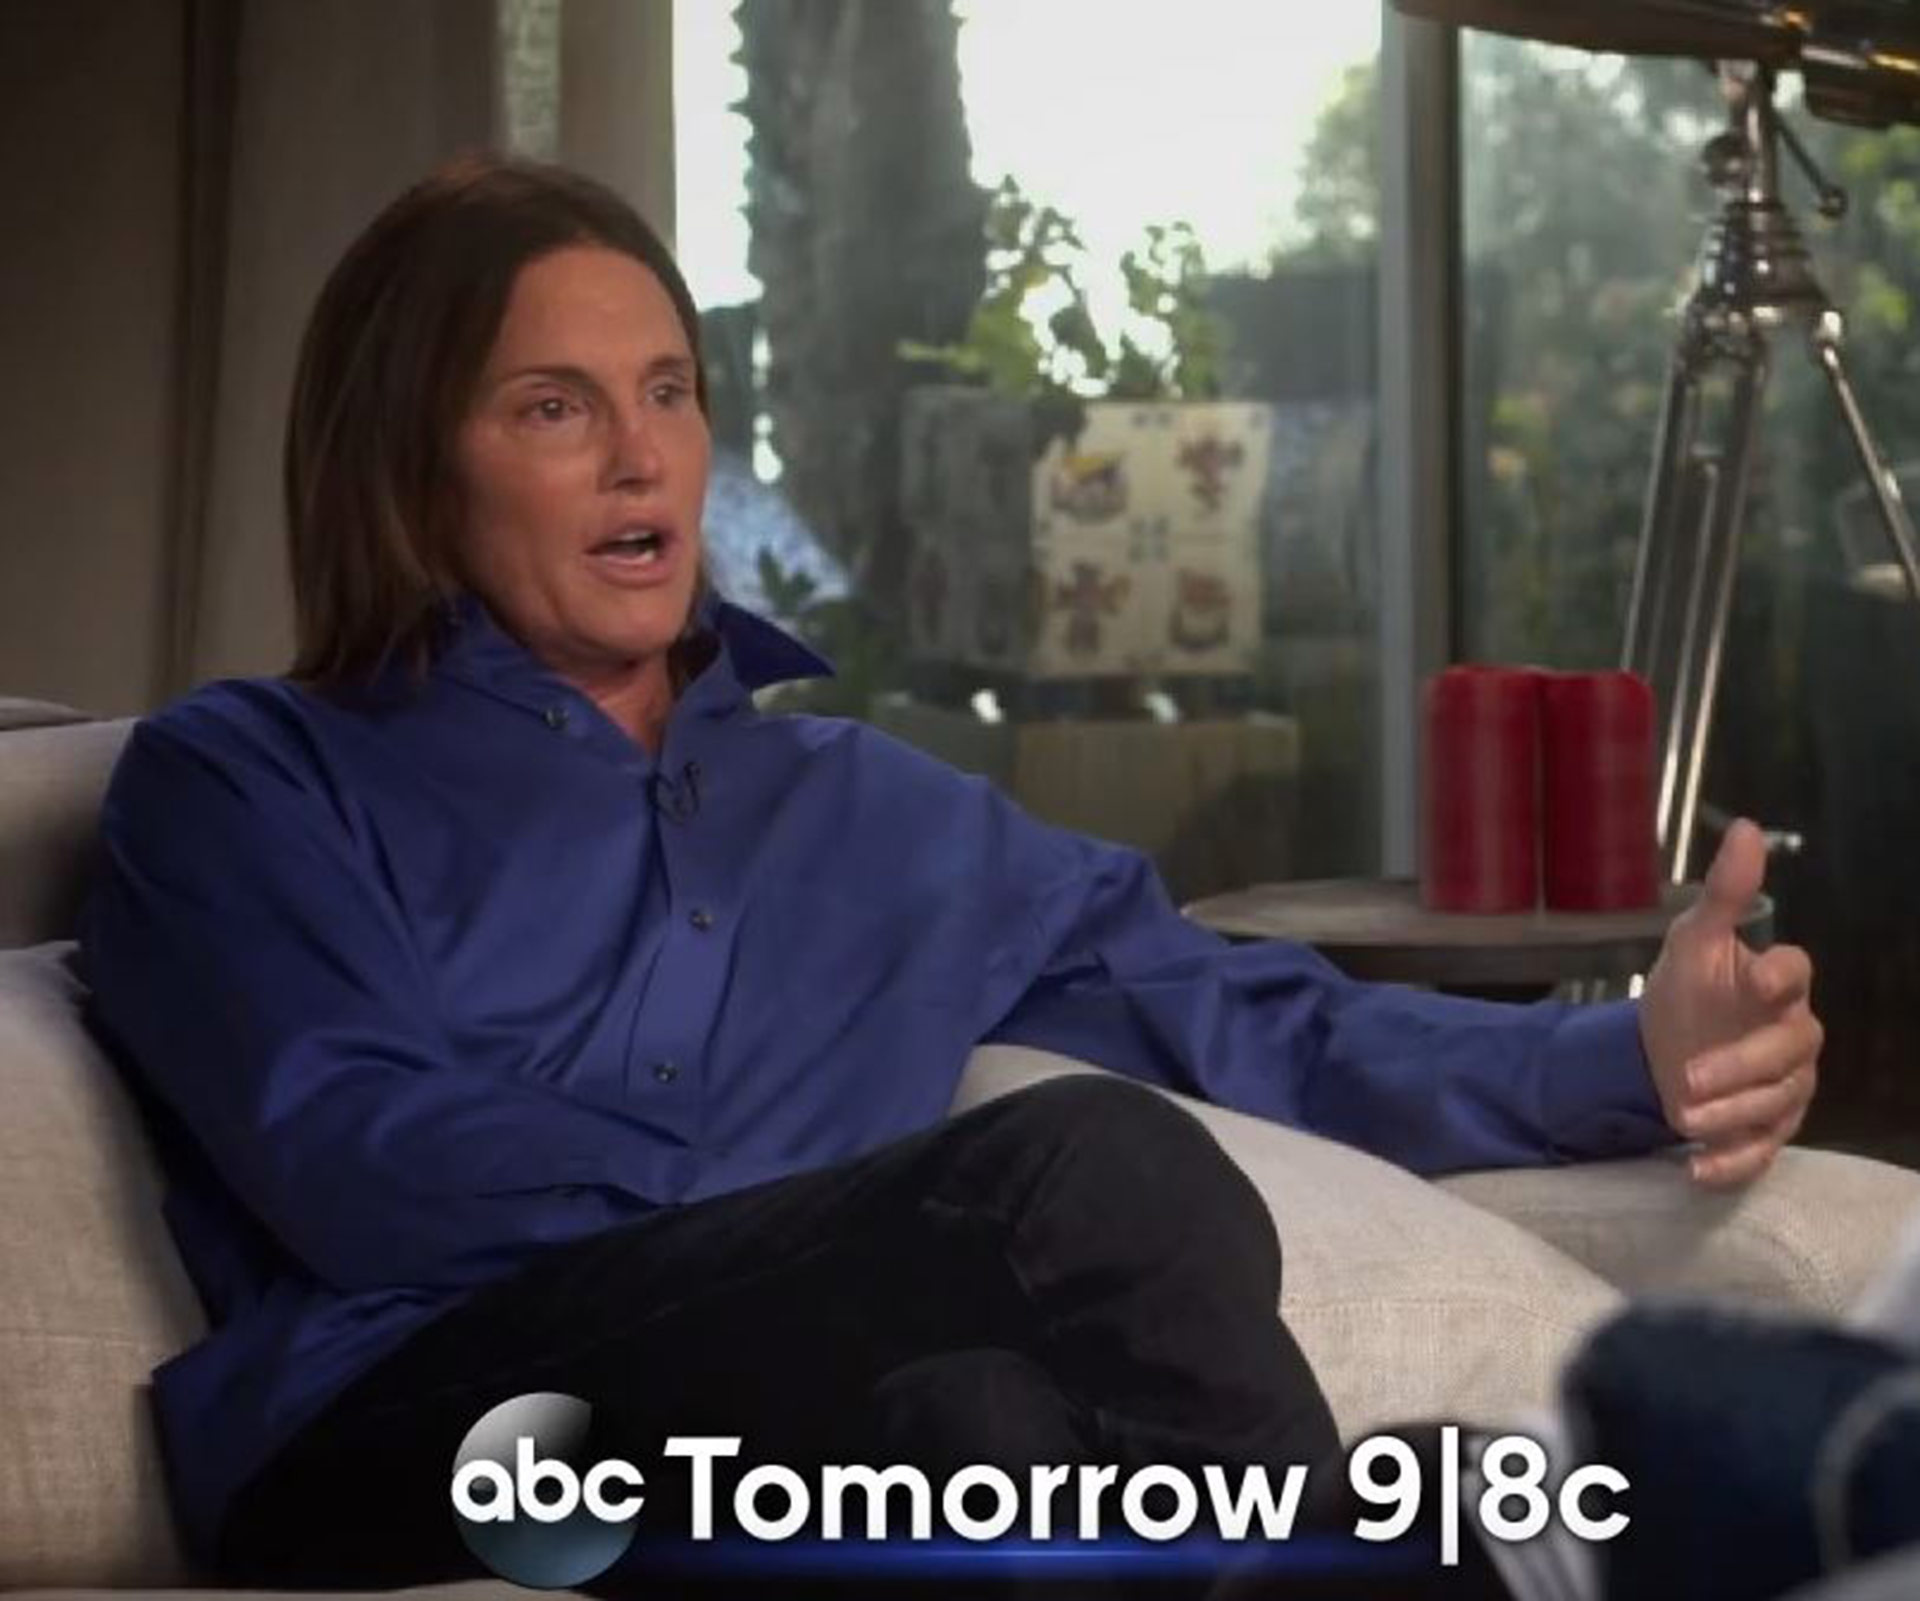 “How does my story end?” An emotional final trailer for Bruce Jenner’s interview has been released